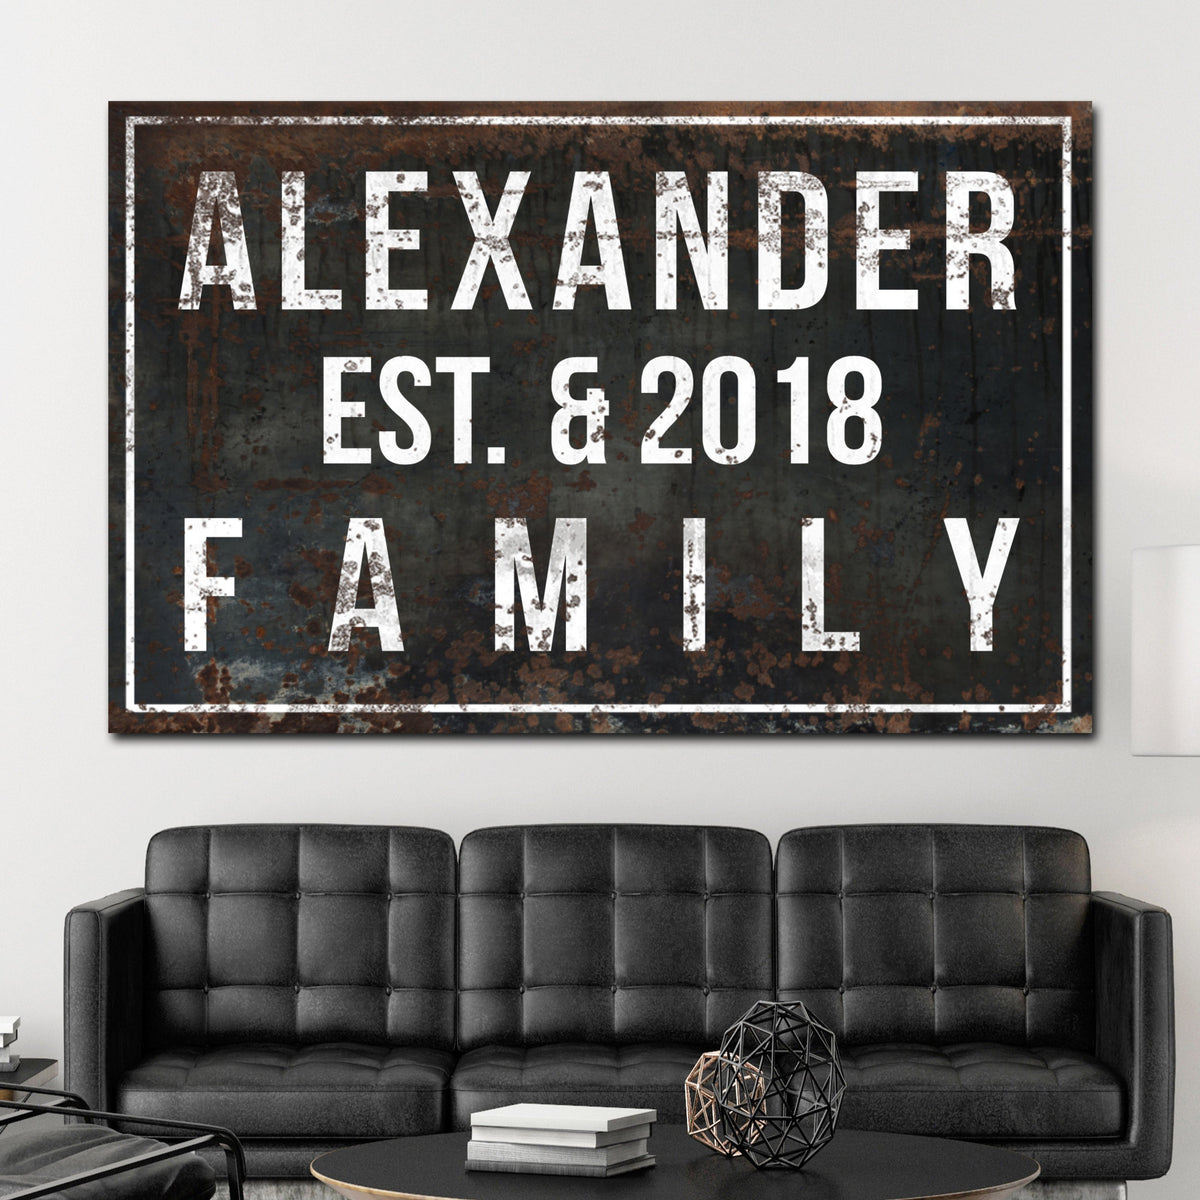 Rustic Established Signs - Personalized Name Sign Wall Decor Canvas Prints